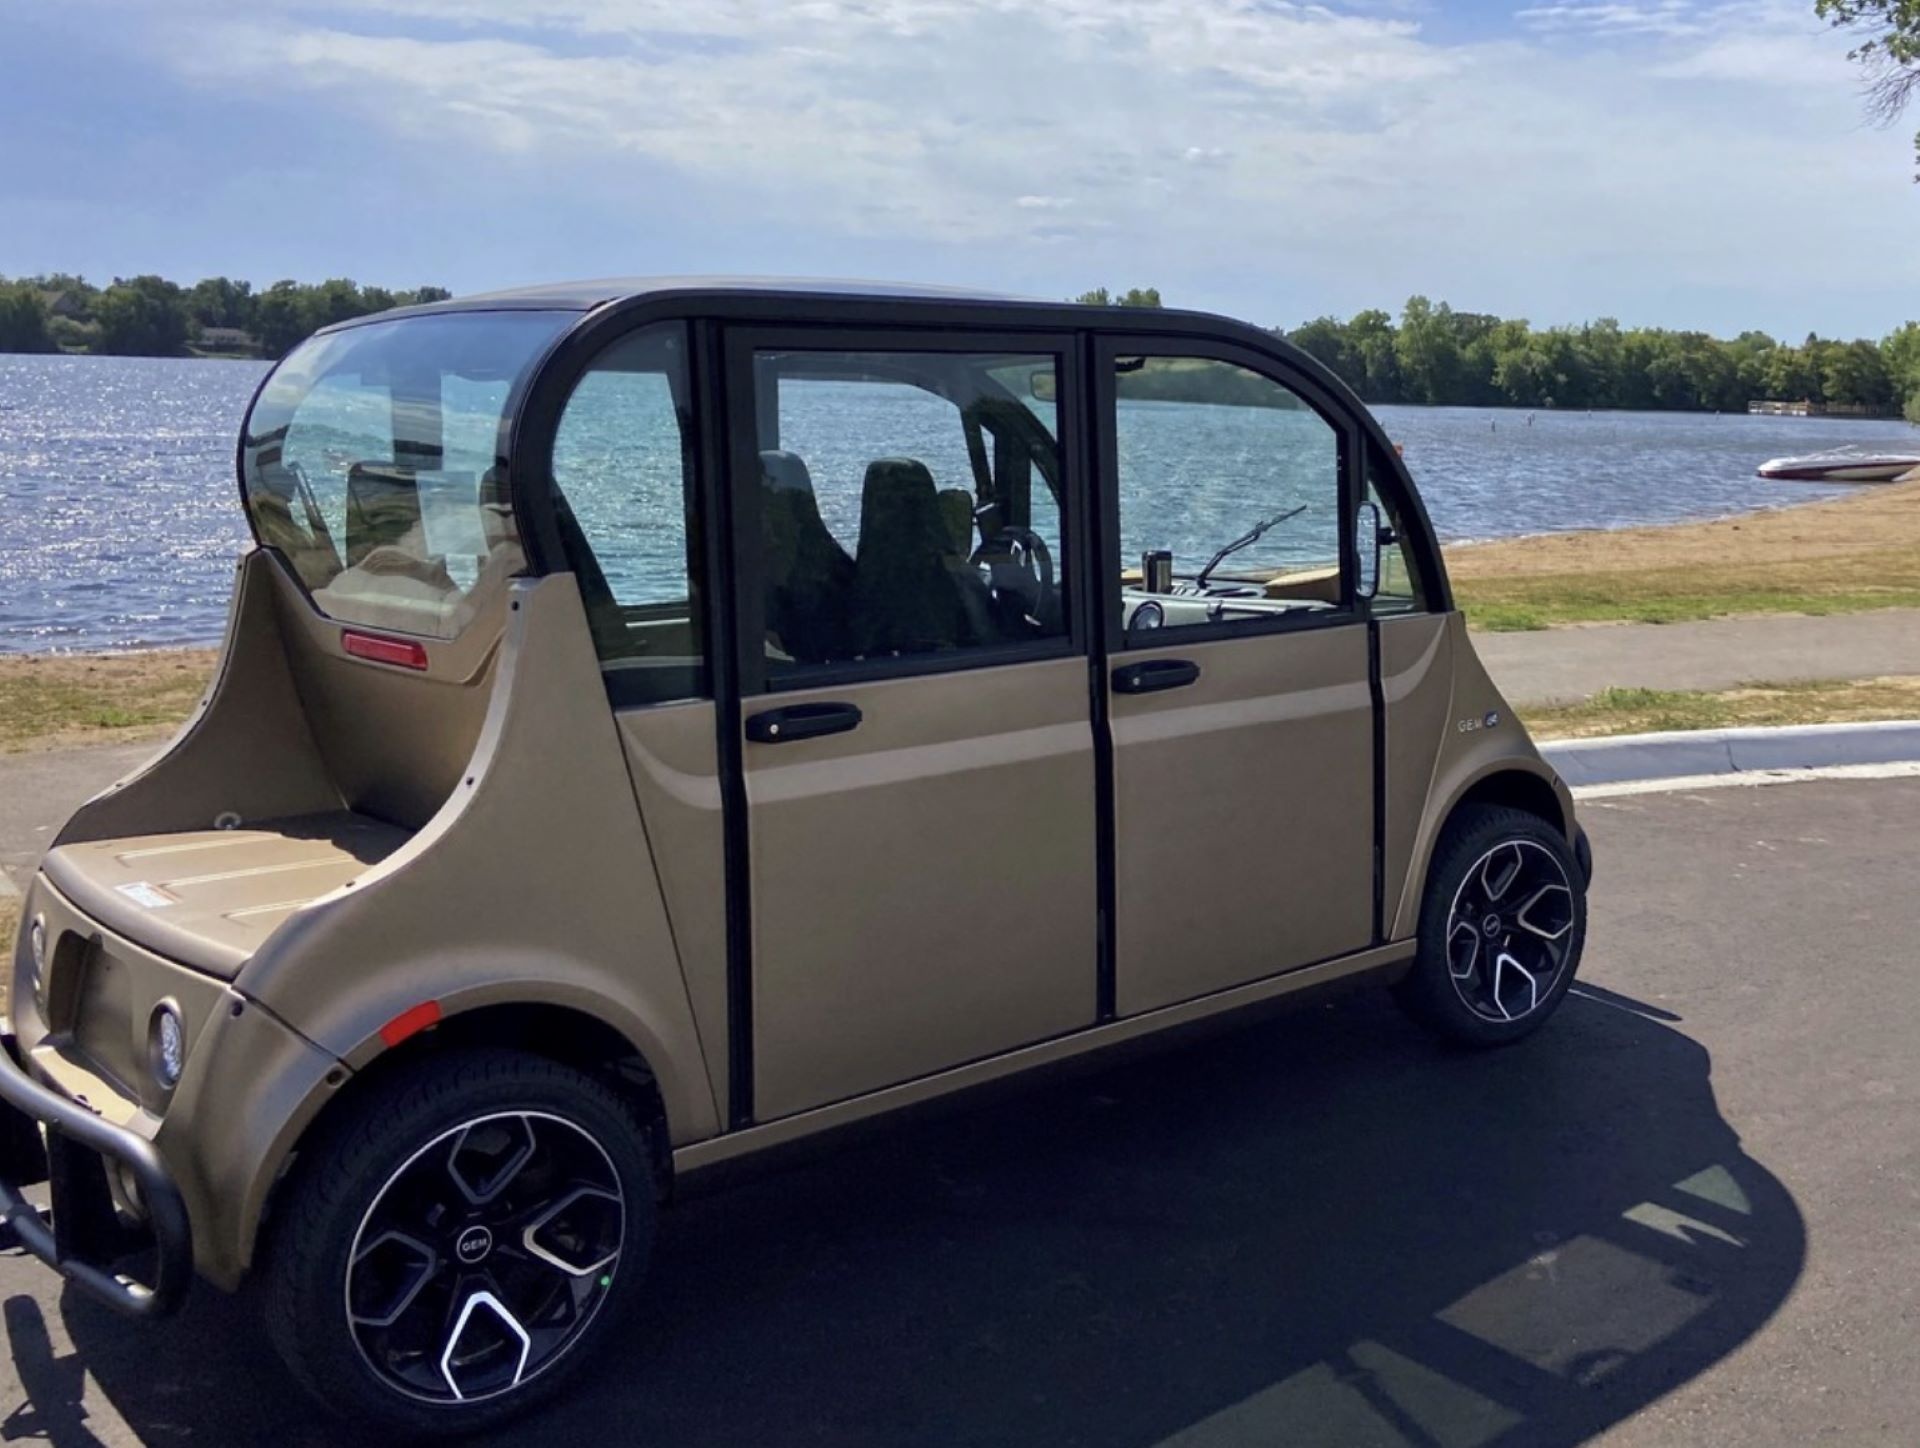 New WAEV electric car will have a solar panel option for rooftops